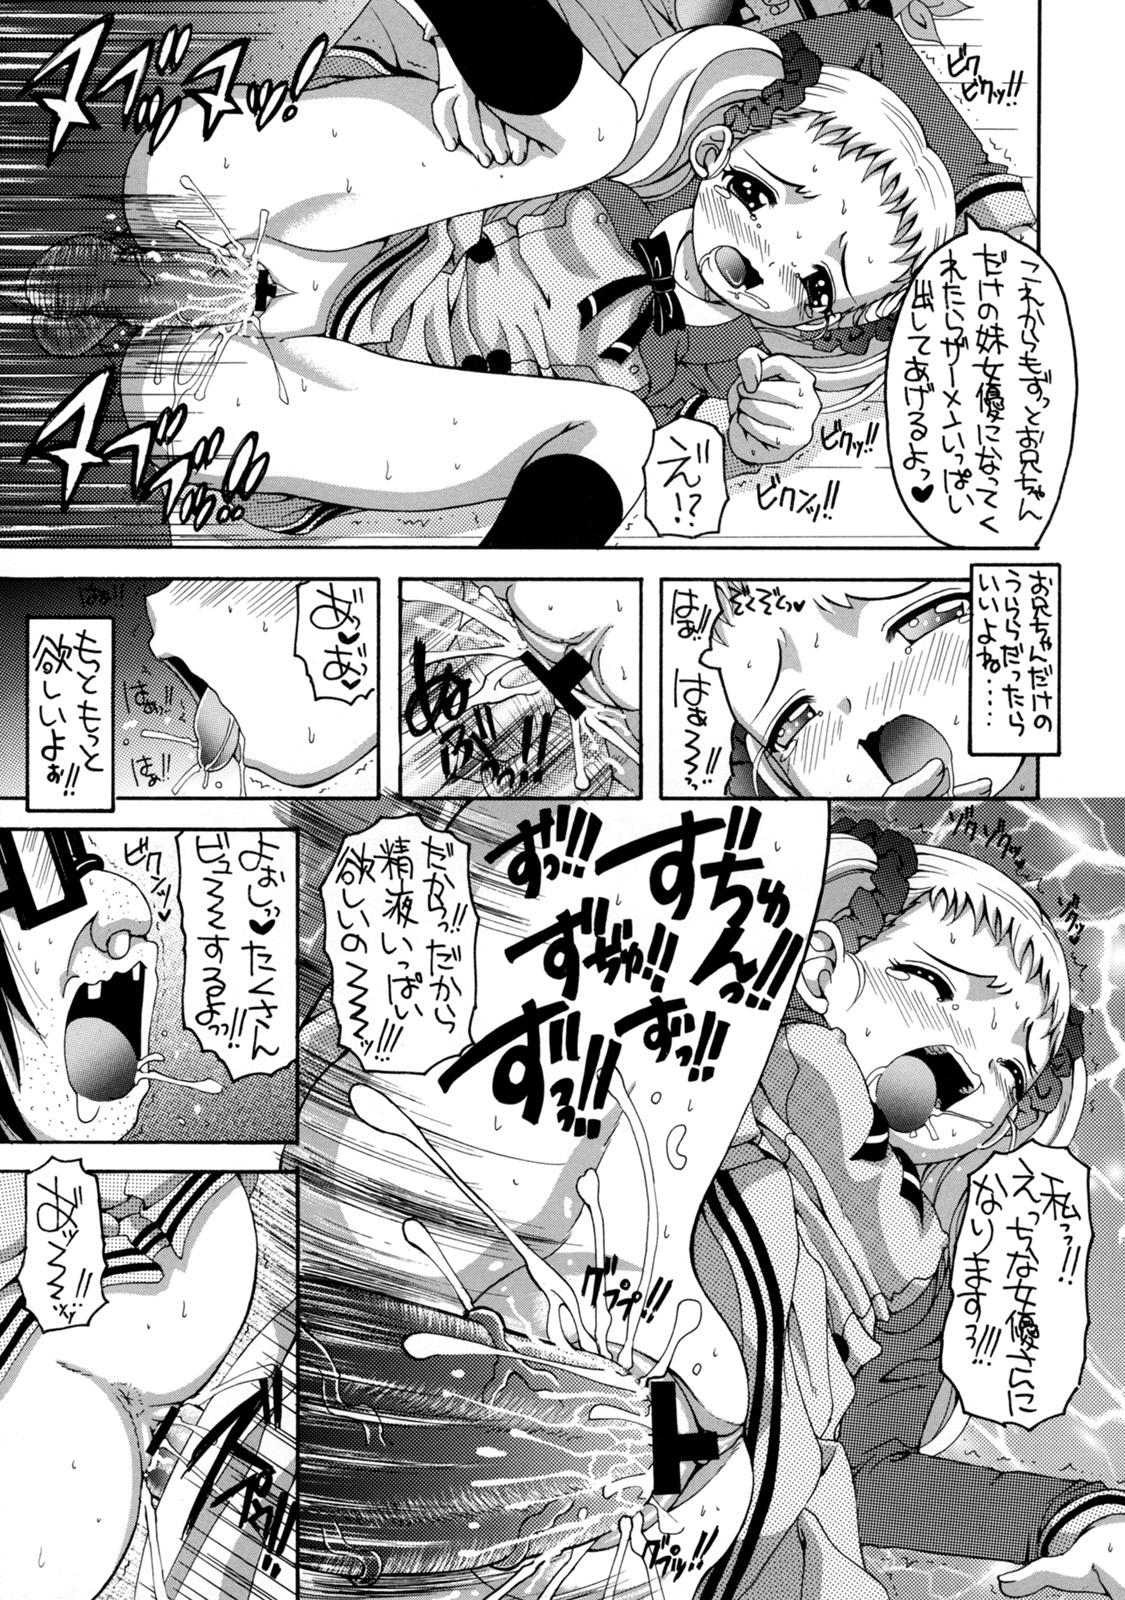 Dominate Yes! Five 3 - Pretty cure Yes precure 5 Gorgeous - Page 12